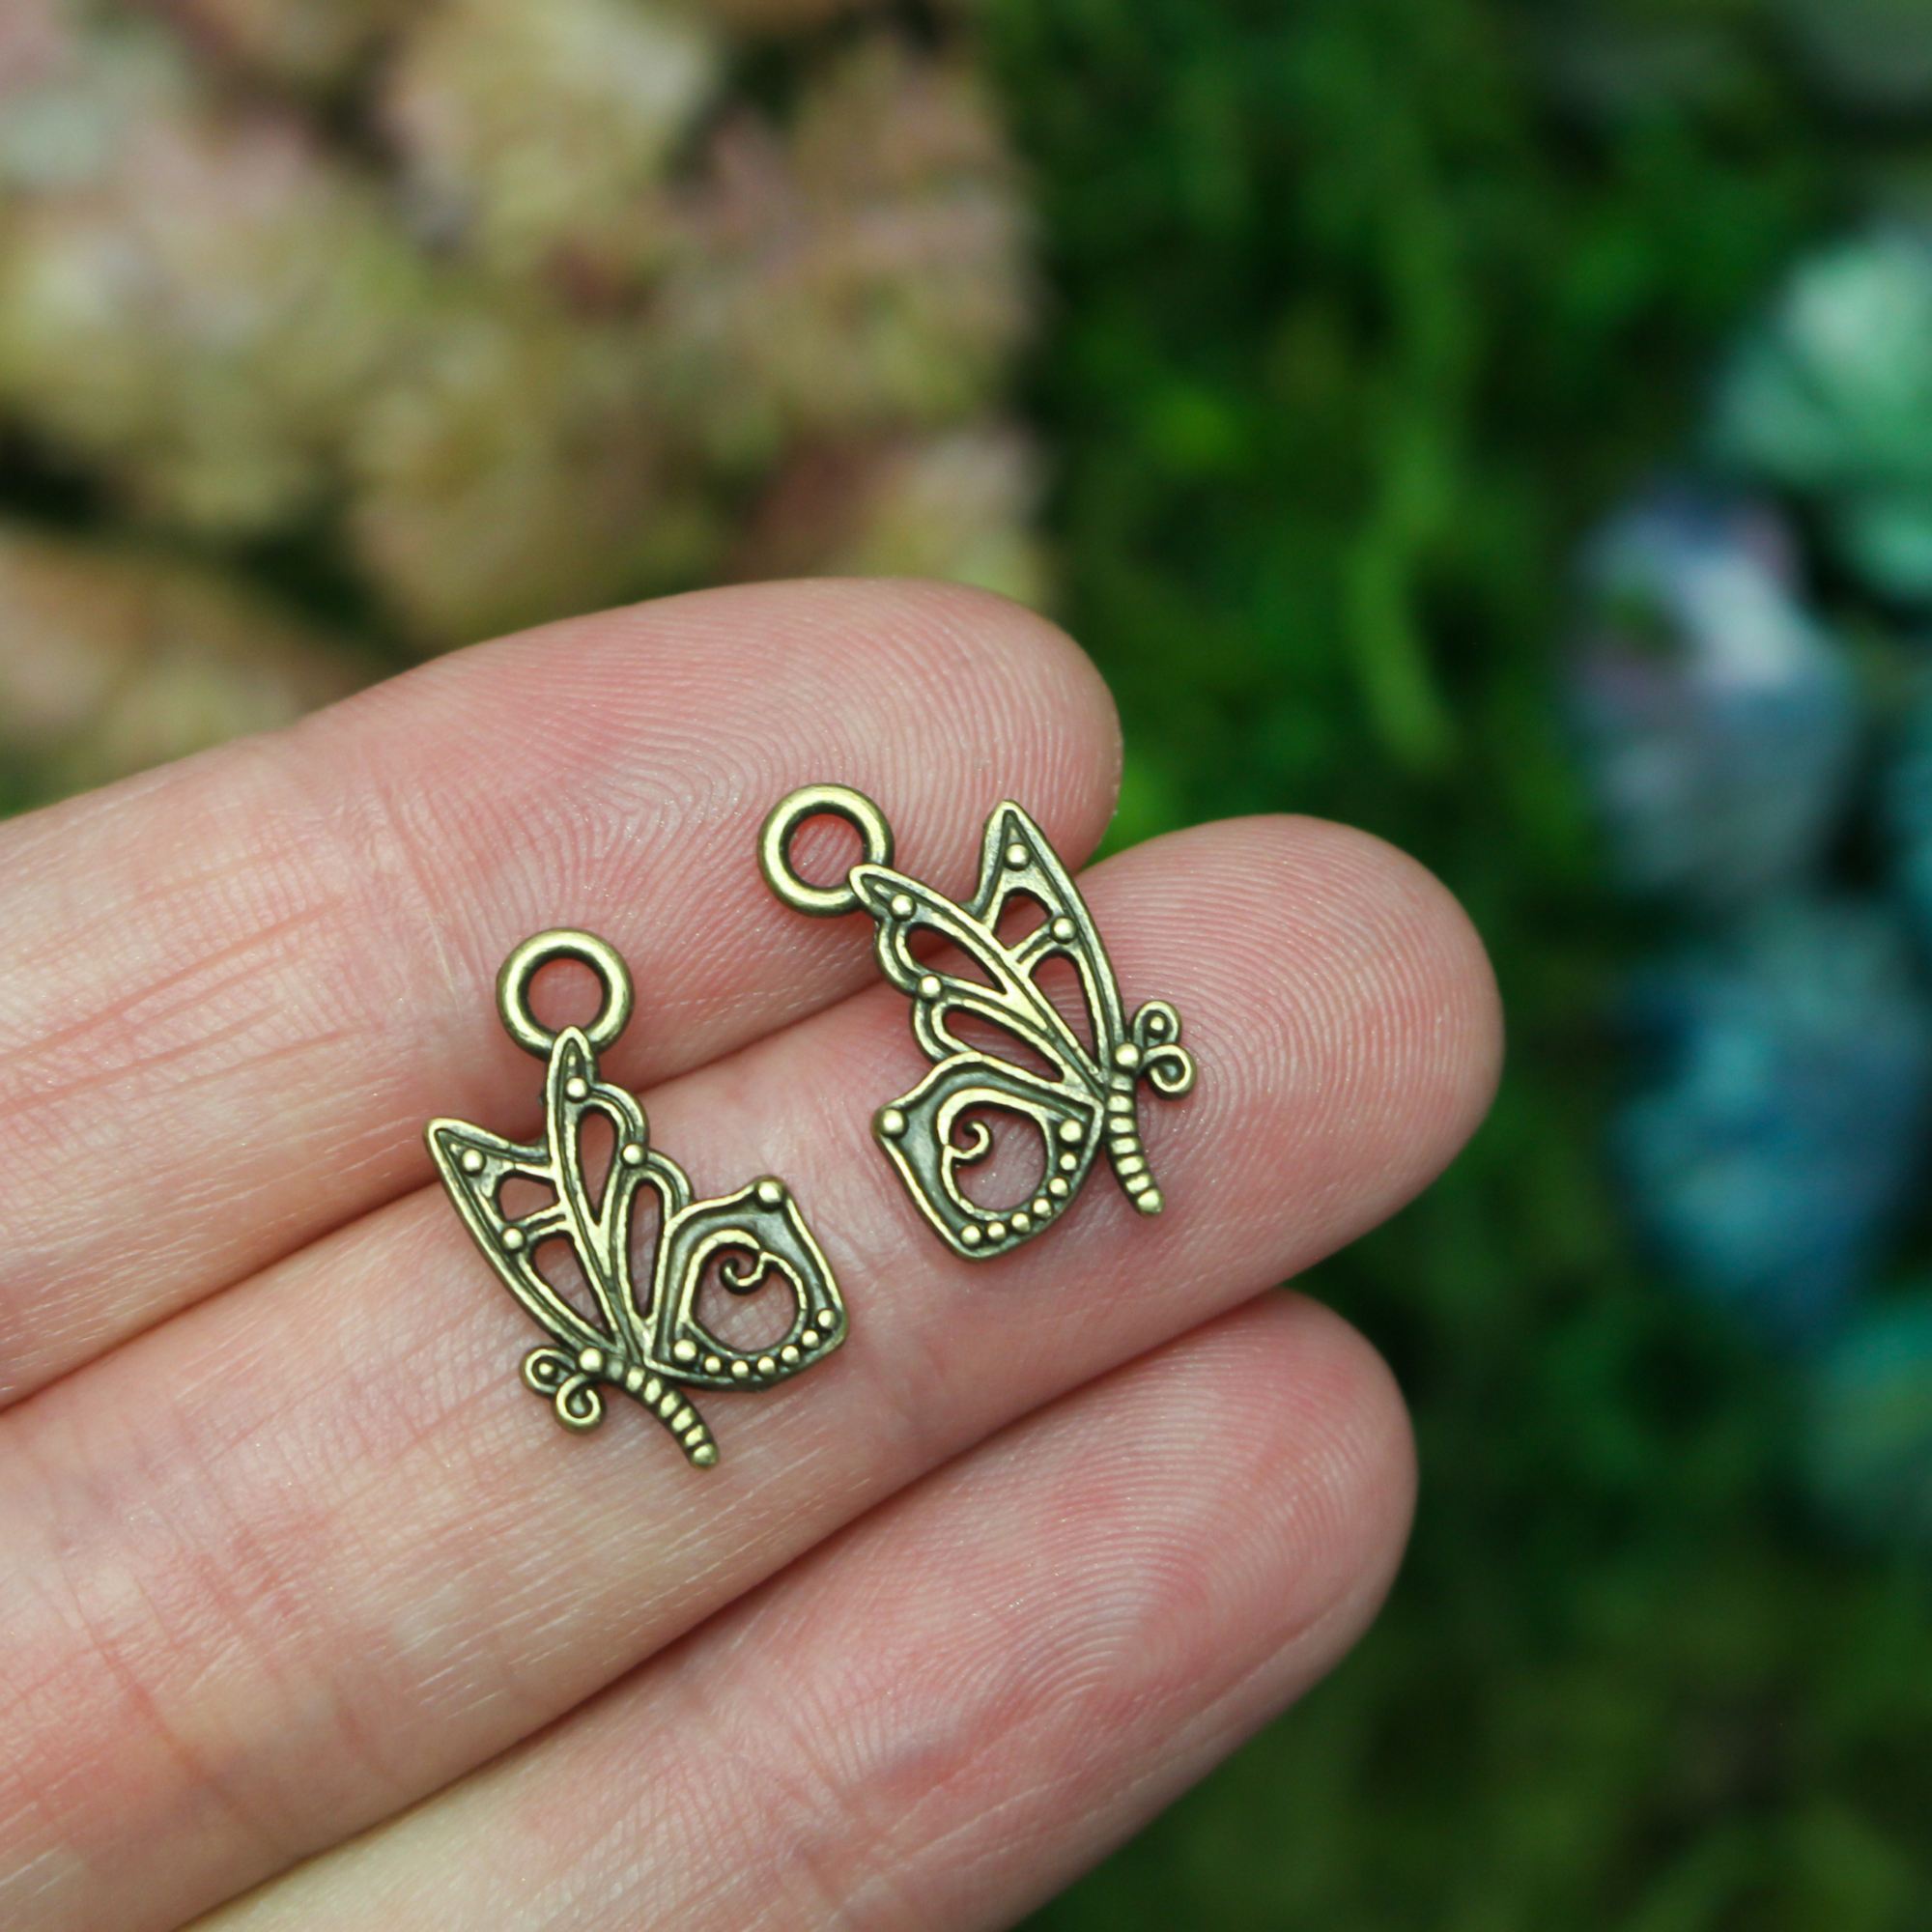 Butterfly charms in an antiqued bronze finish, 16mm long